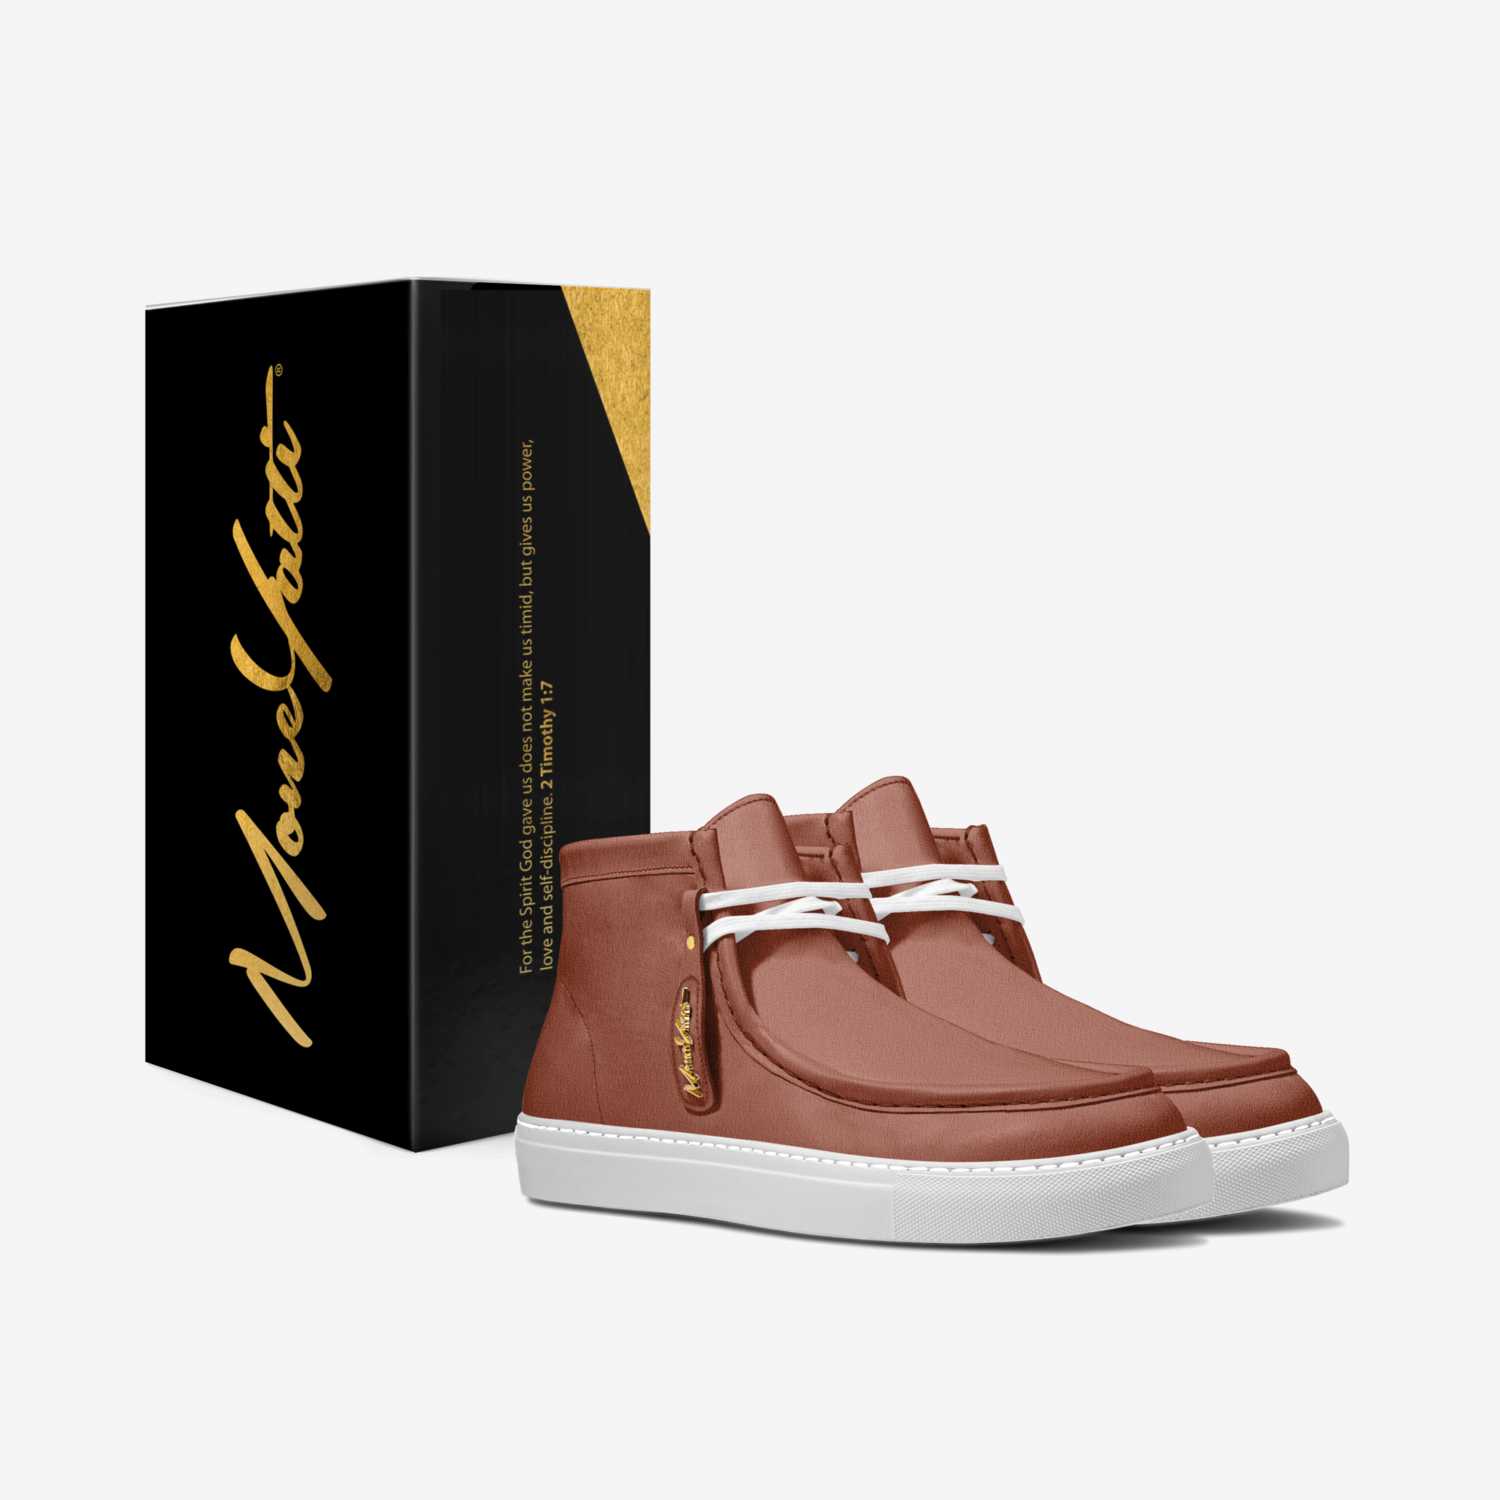 LUX SUEDE 007 custom made in Italy shoes by Moneyatti Brand | Box view